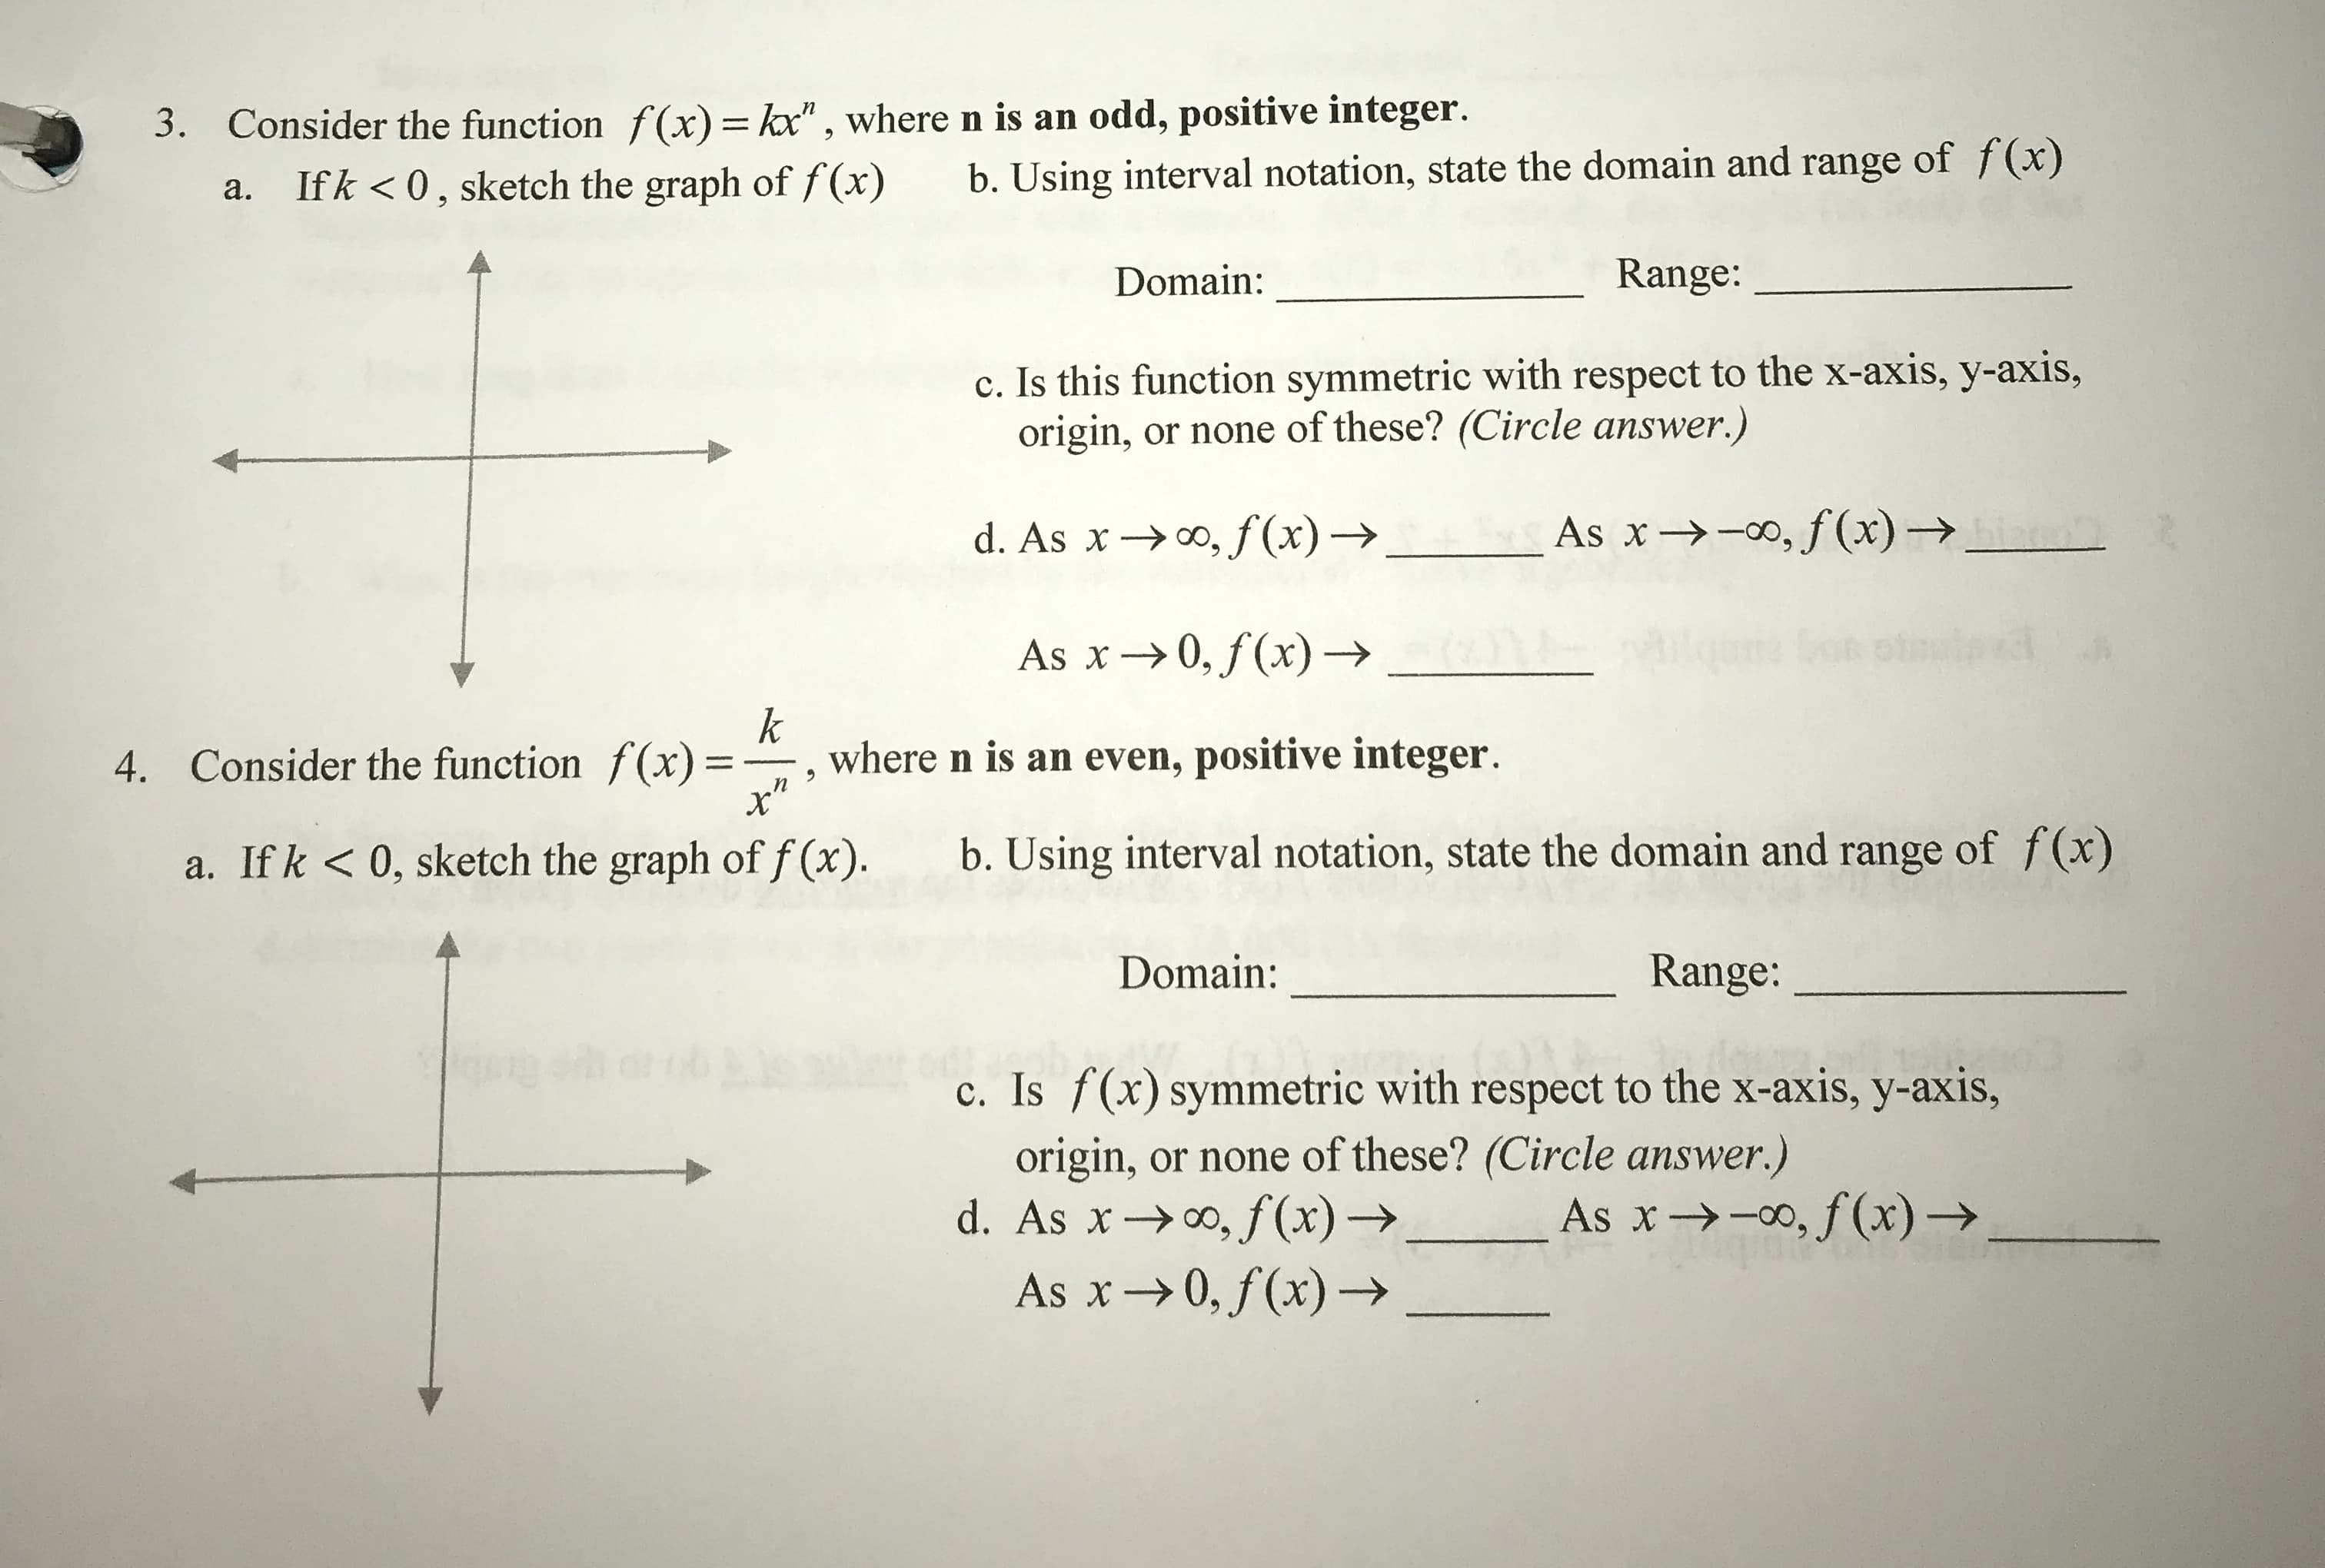 3. Consider the function f(x)-", where n is an odd, positive integer.
a. Ifk <0, sketch the graph of x) b. Using interval notation, state the domain and range of f(x)
ain:Range:
c. Is this function symmetric with respect to the x-axis, y-axis,
origin, or none of these? (Circle answer.)
d. As x → oo,f(x) →
As x →-00,"f(x) →
As x → 0,f(x) →
4. Consider the function f(x)where n is an even, positive integer
a. If k <0, sketch the graph of f (x).
b. Using interval notation, state the domain and range of f(x)
Domain:
Range:
c. Is f(x) symmetric with respect to the x-axis, y-axis,
origin, or none of these? (Circle answer.)
d. As x → 00,f(x) →
. As x →-00, f(x) →
As x → 0,f(x) →
